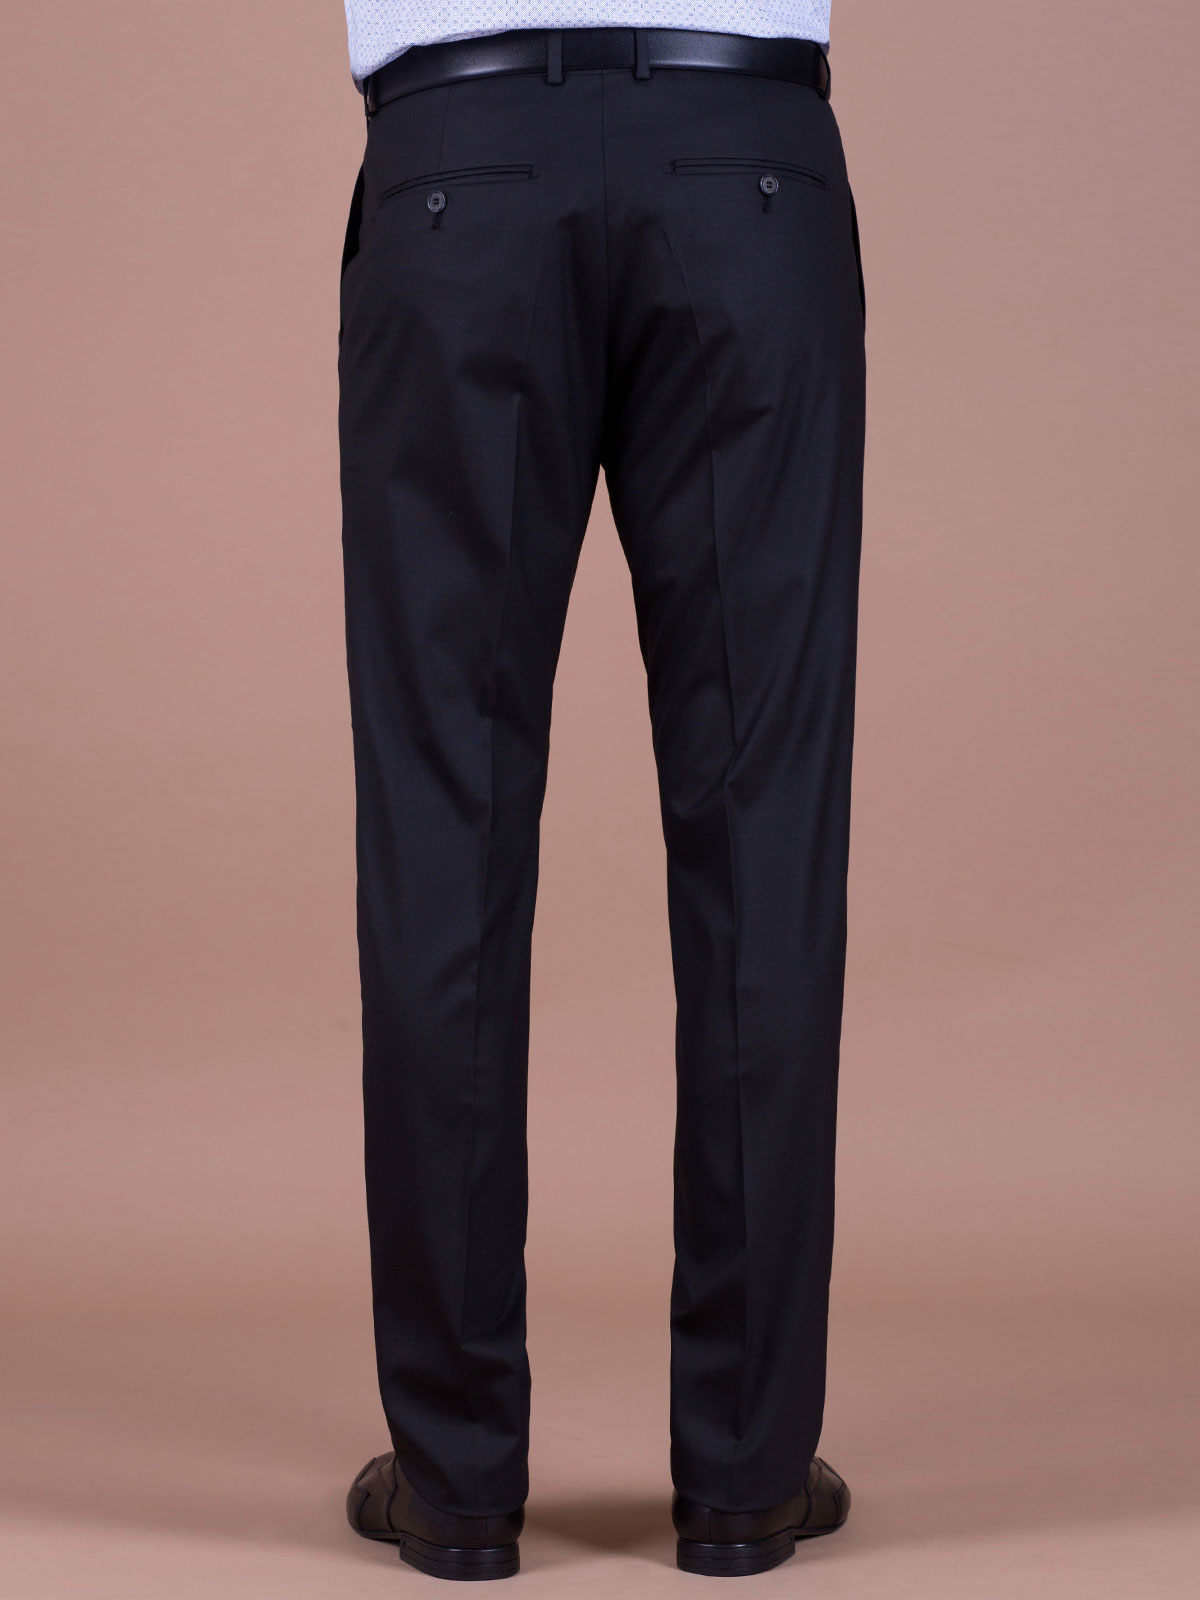 Pants in black cotton and viscose - 63184 € 30.93 img2